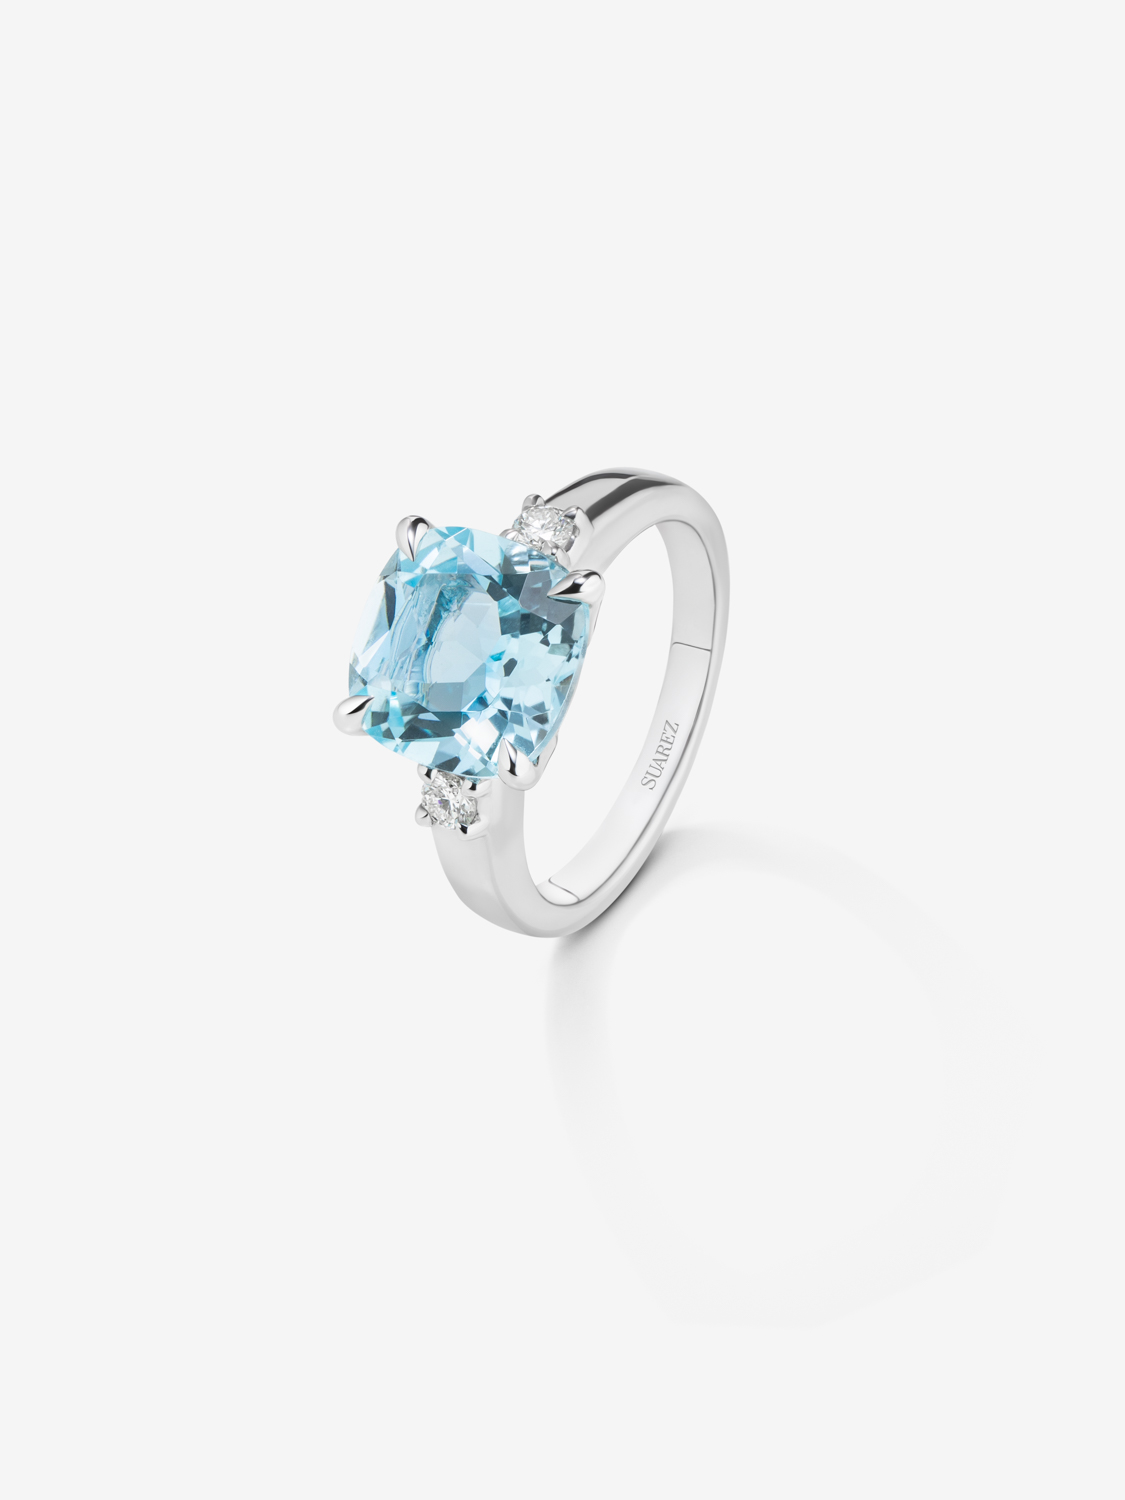 Three-piece 925 silver ring with topaz and diamonds